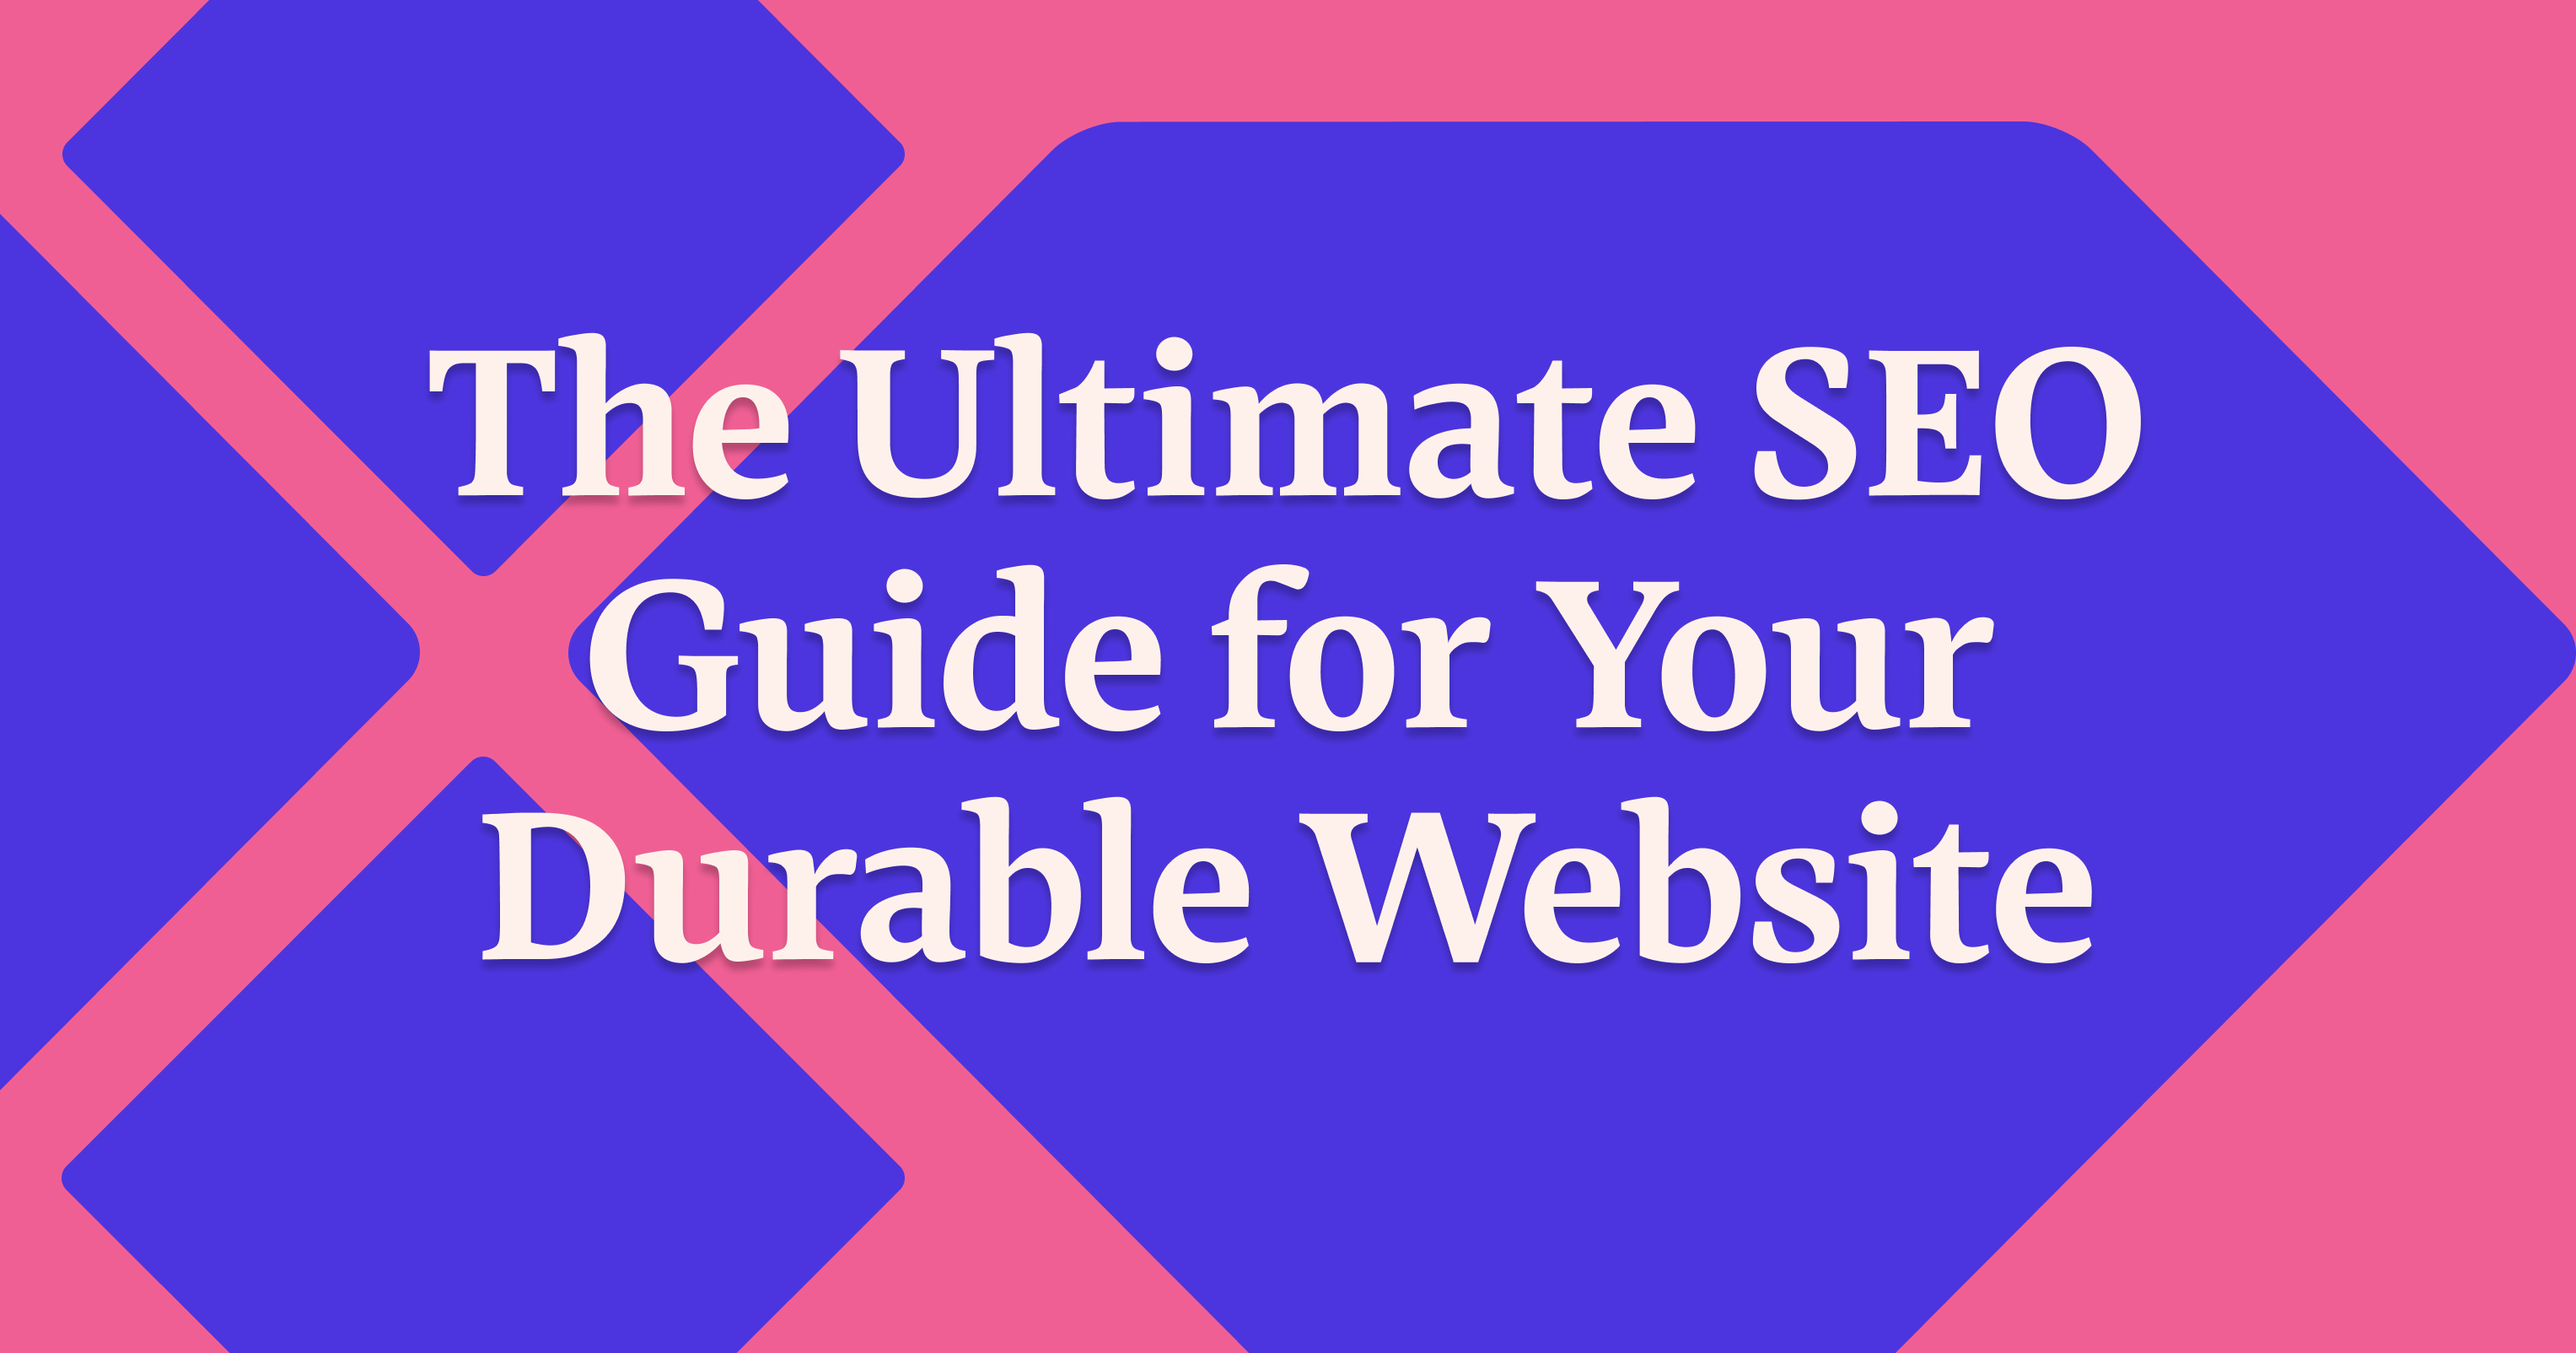 The Ultimate SEO Guide for Durable Websites